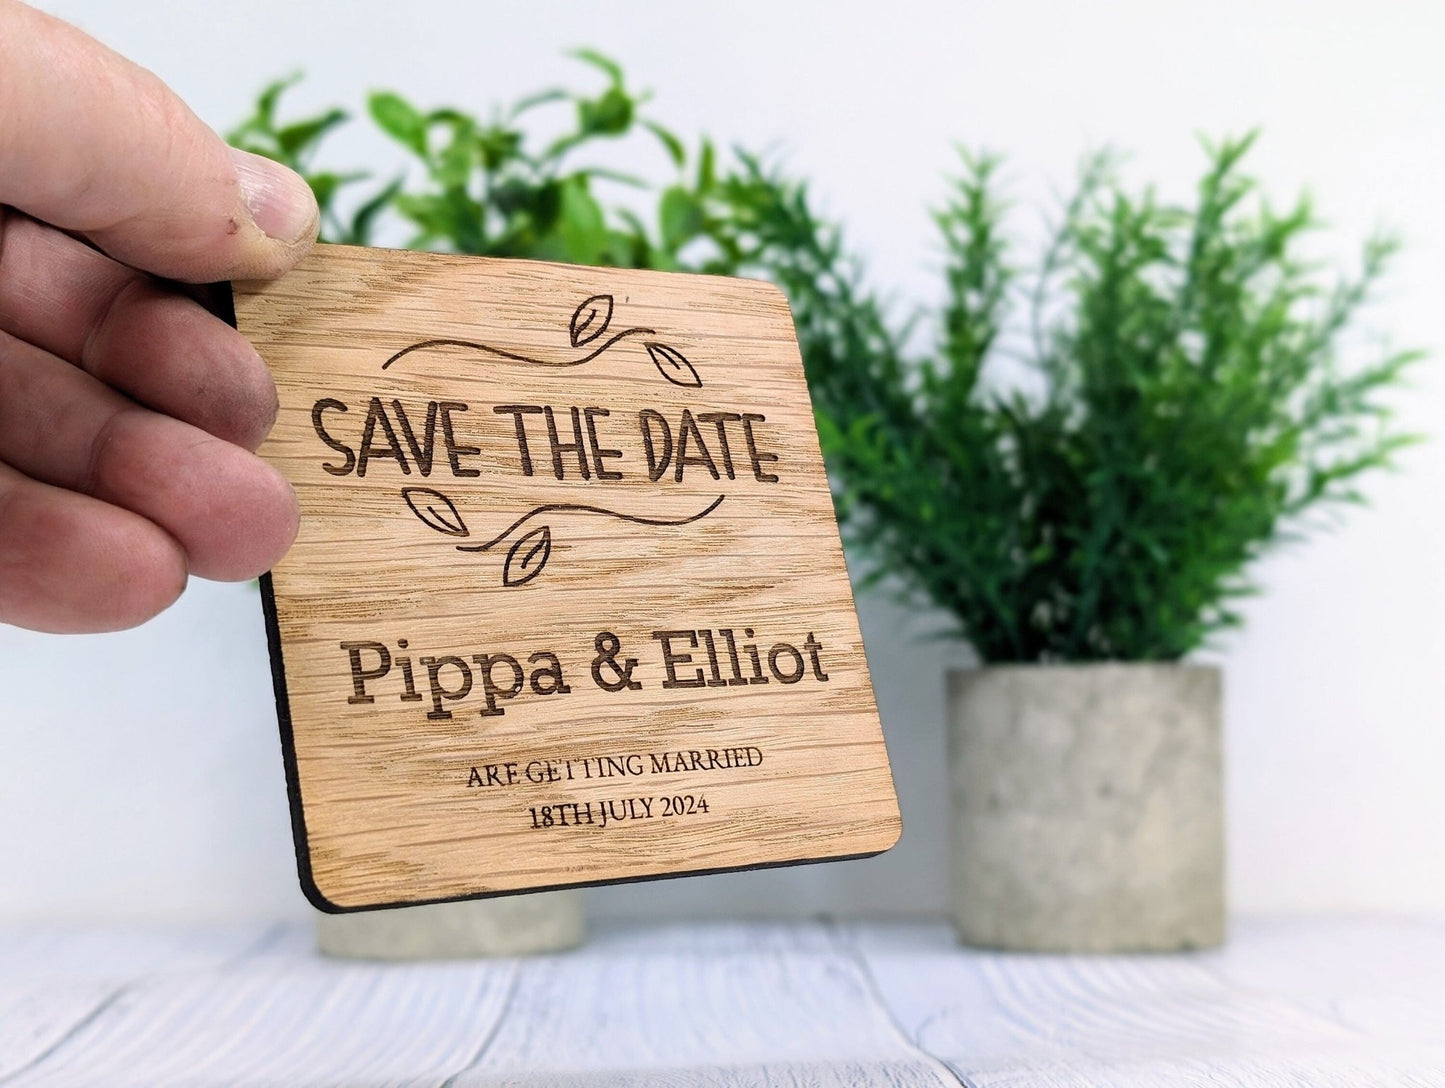 Personalised 'Save The Date' Wooden Coasters - Custom with Names & Date, 90mm x 90mm, Unique Oak Veneer Wedding Favours - CherryGroveCraft